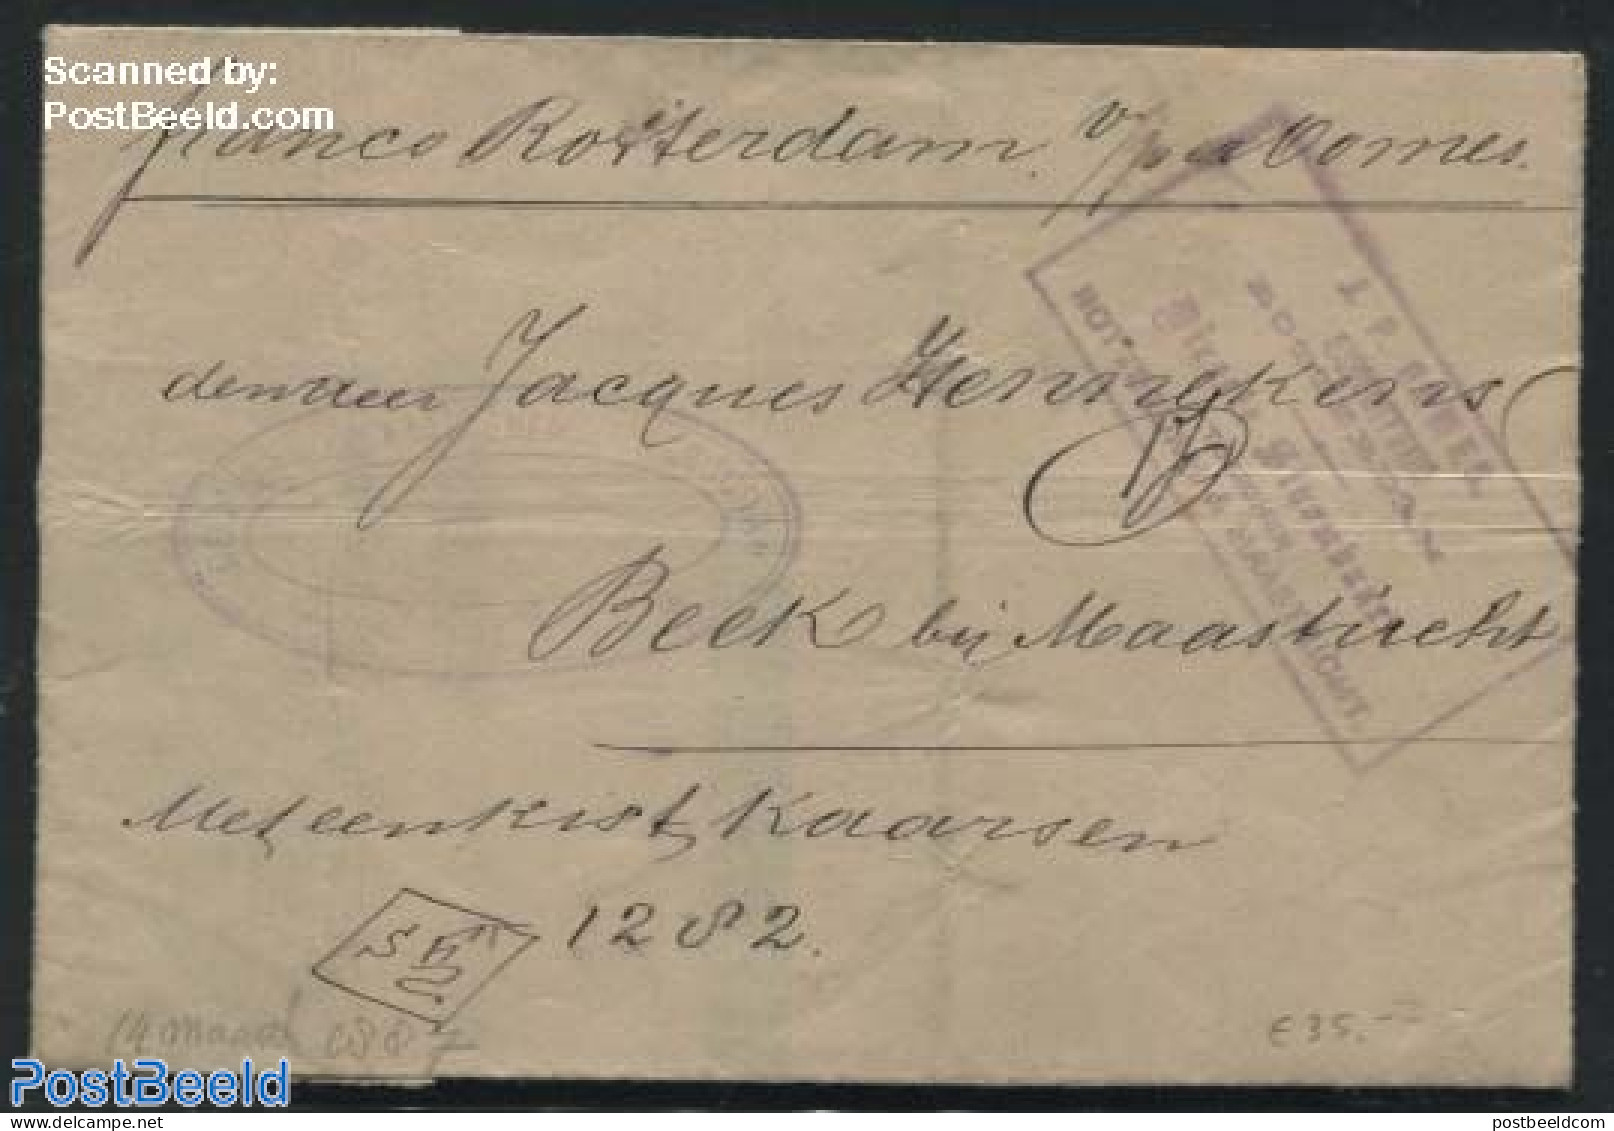 Netherlands 1887 Letter Sent By Oomes Shippost To Beek Near Maastricht, Postal History - Storia Postale